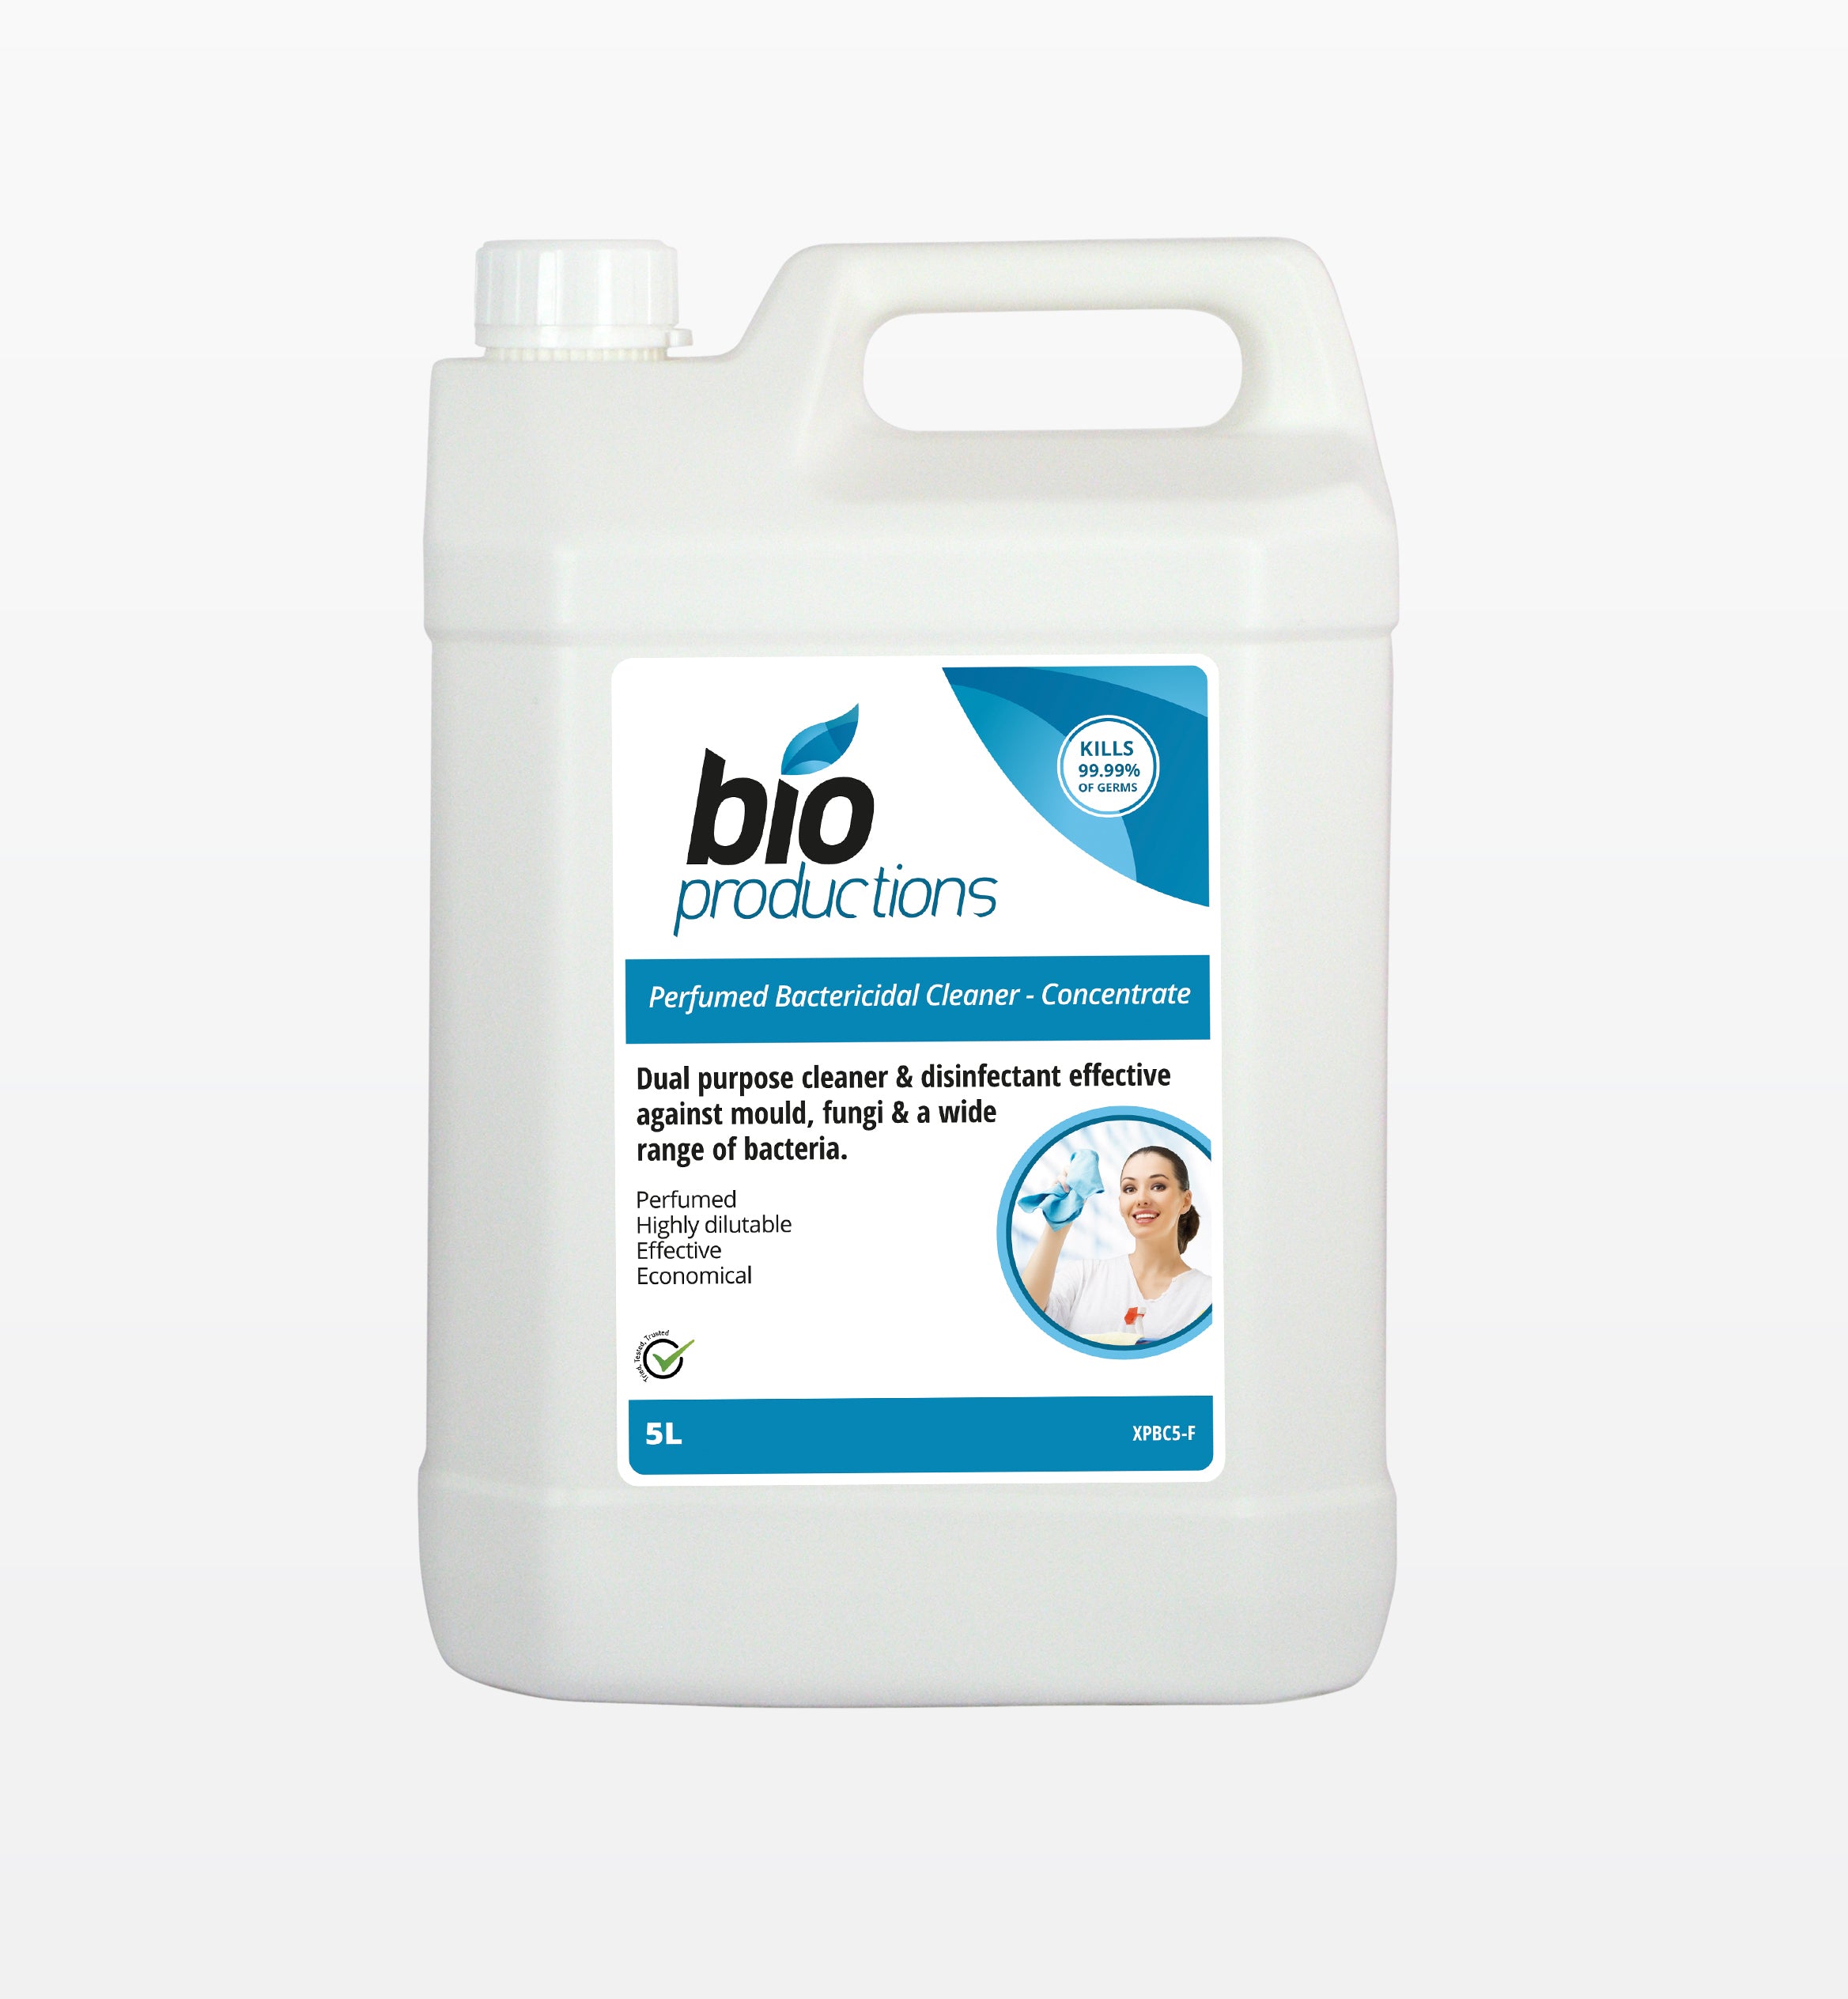 Bio Productions Perfumed Bactericidal Cleaner - Concentrate XPBC5 5 Ltr  (Kills 99.999% of bacteria)